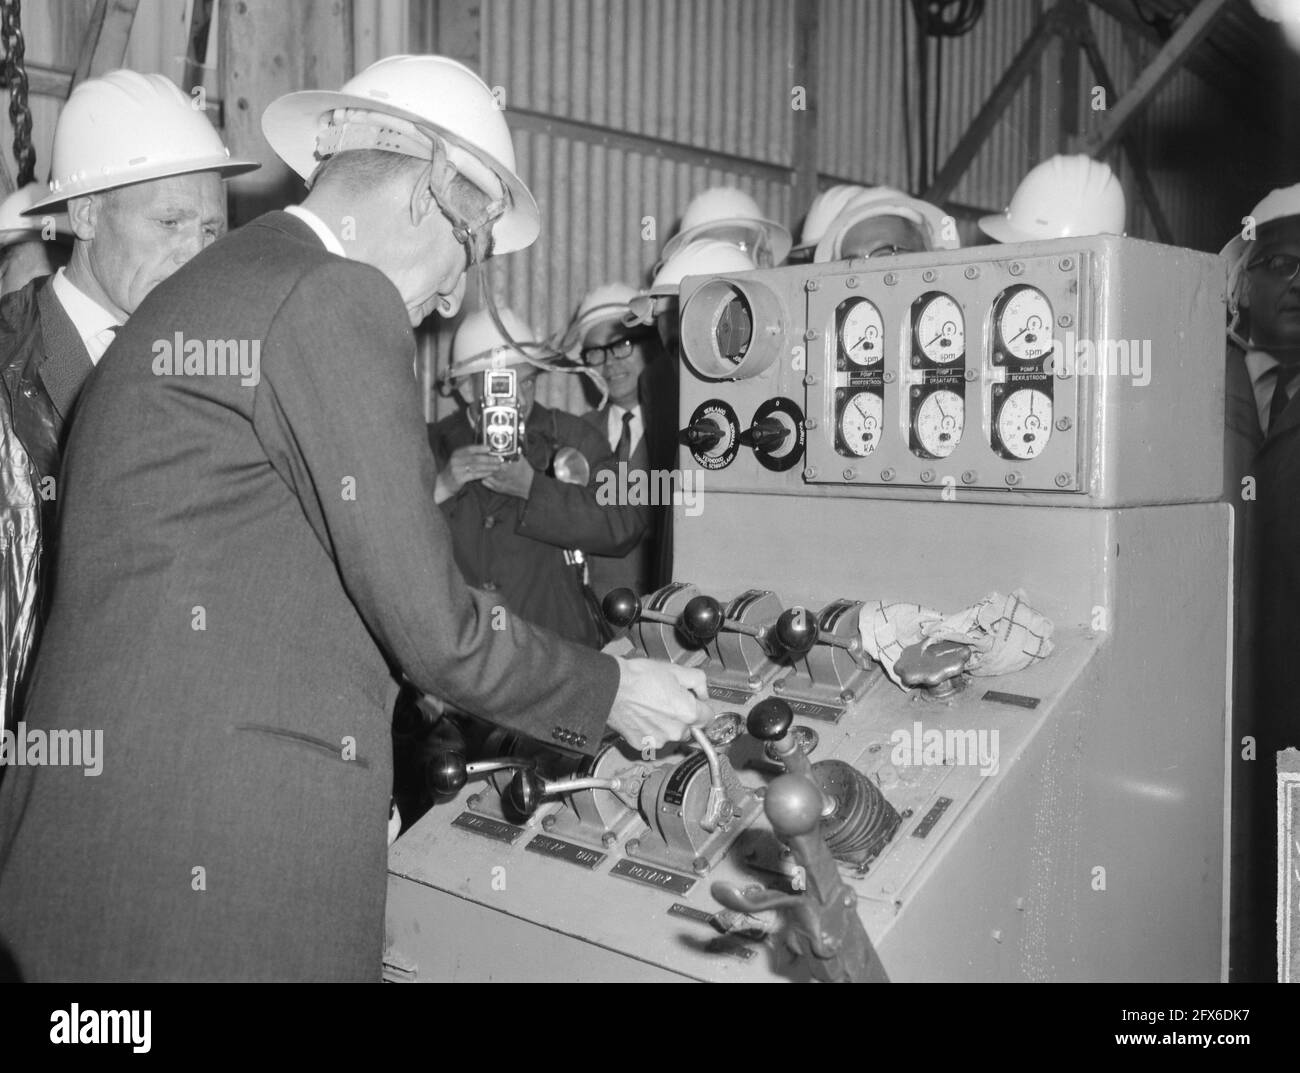 Slochteren natural gas field officially put into use Mr. Fock and Dr. de Pous during the commissioning of the tower, July 25, 1963, The Netherlands, 20th century press agency photo, news to remember, documentary, historic photography 1945-1990, visual stories, human history of the Twentieth Century, capturing moments in time Stock Photo